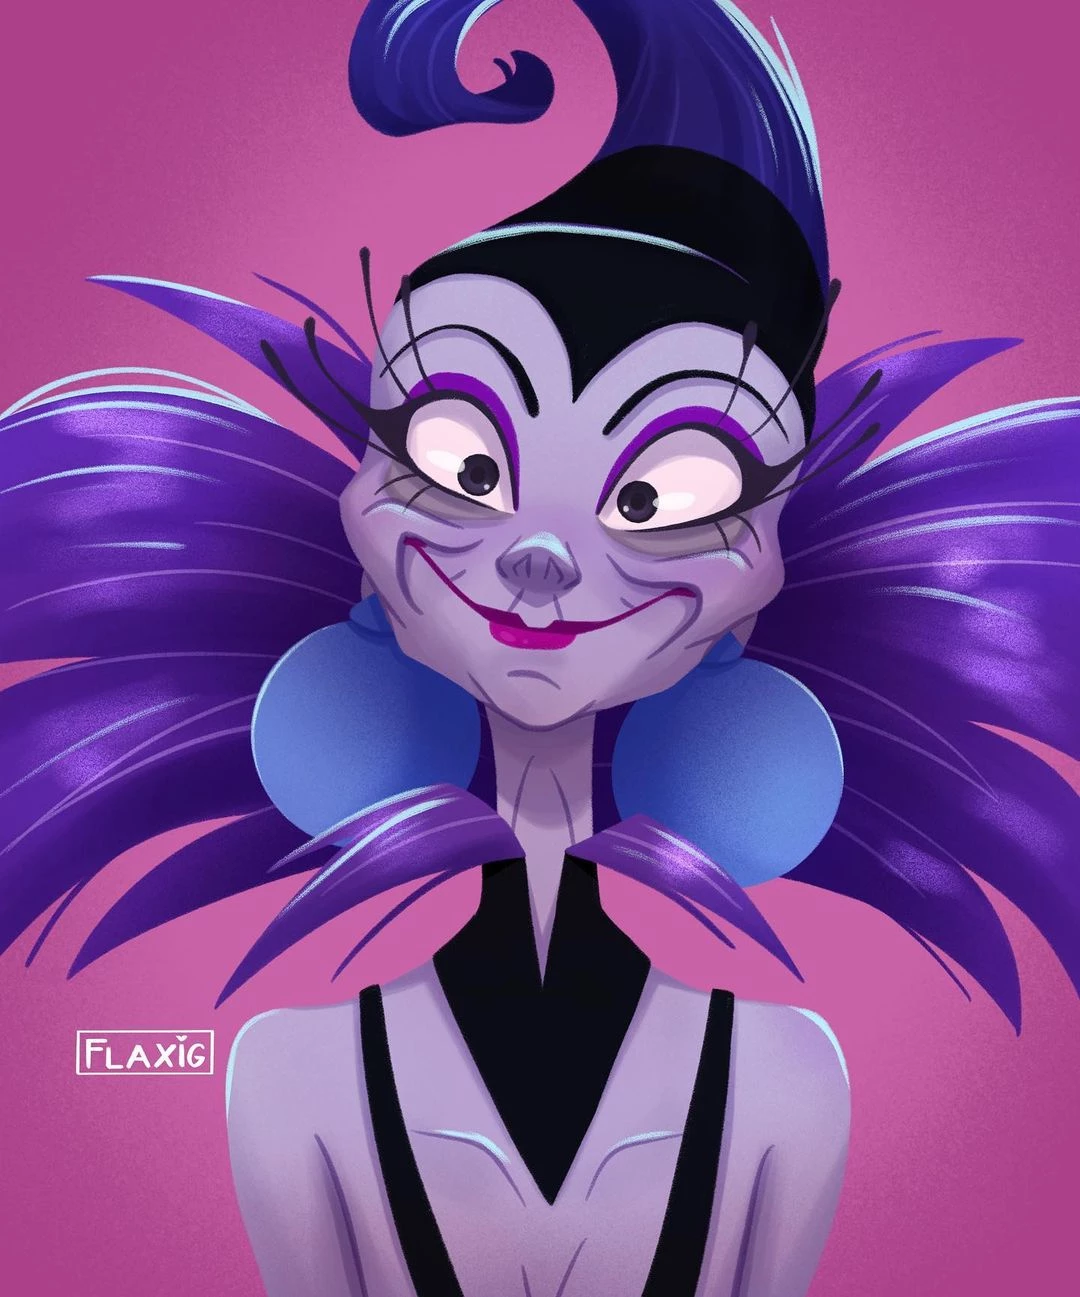 This Is Only One Of Many Hilarious Expressions In The Show By Yzma (The Emperor’s New Groove)